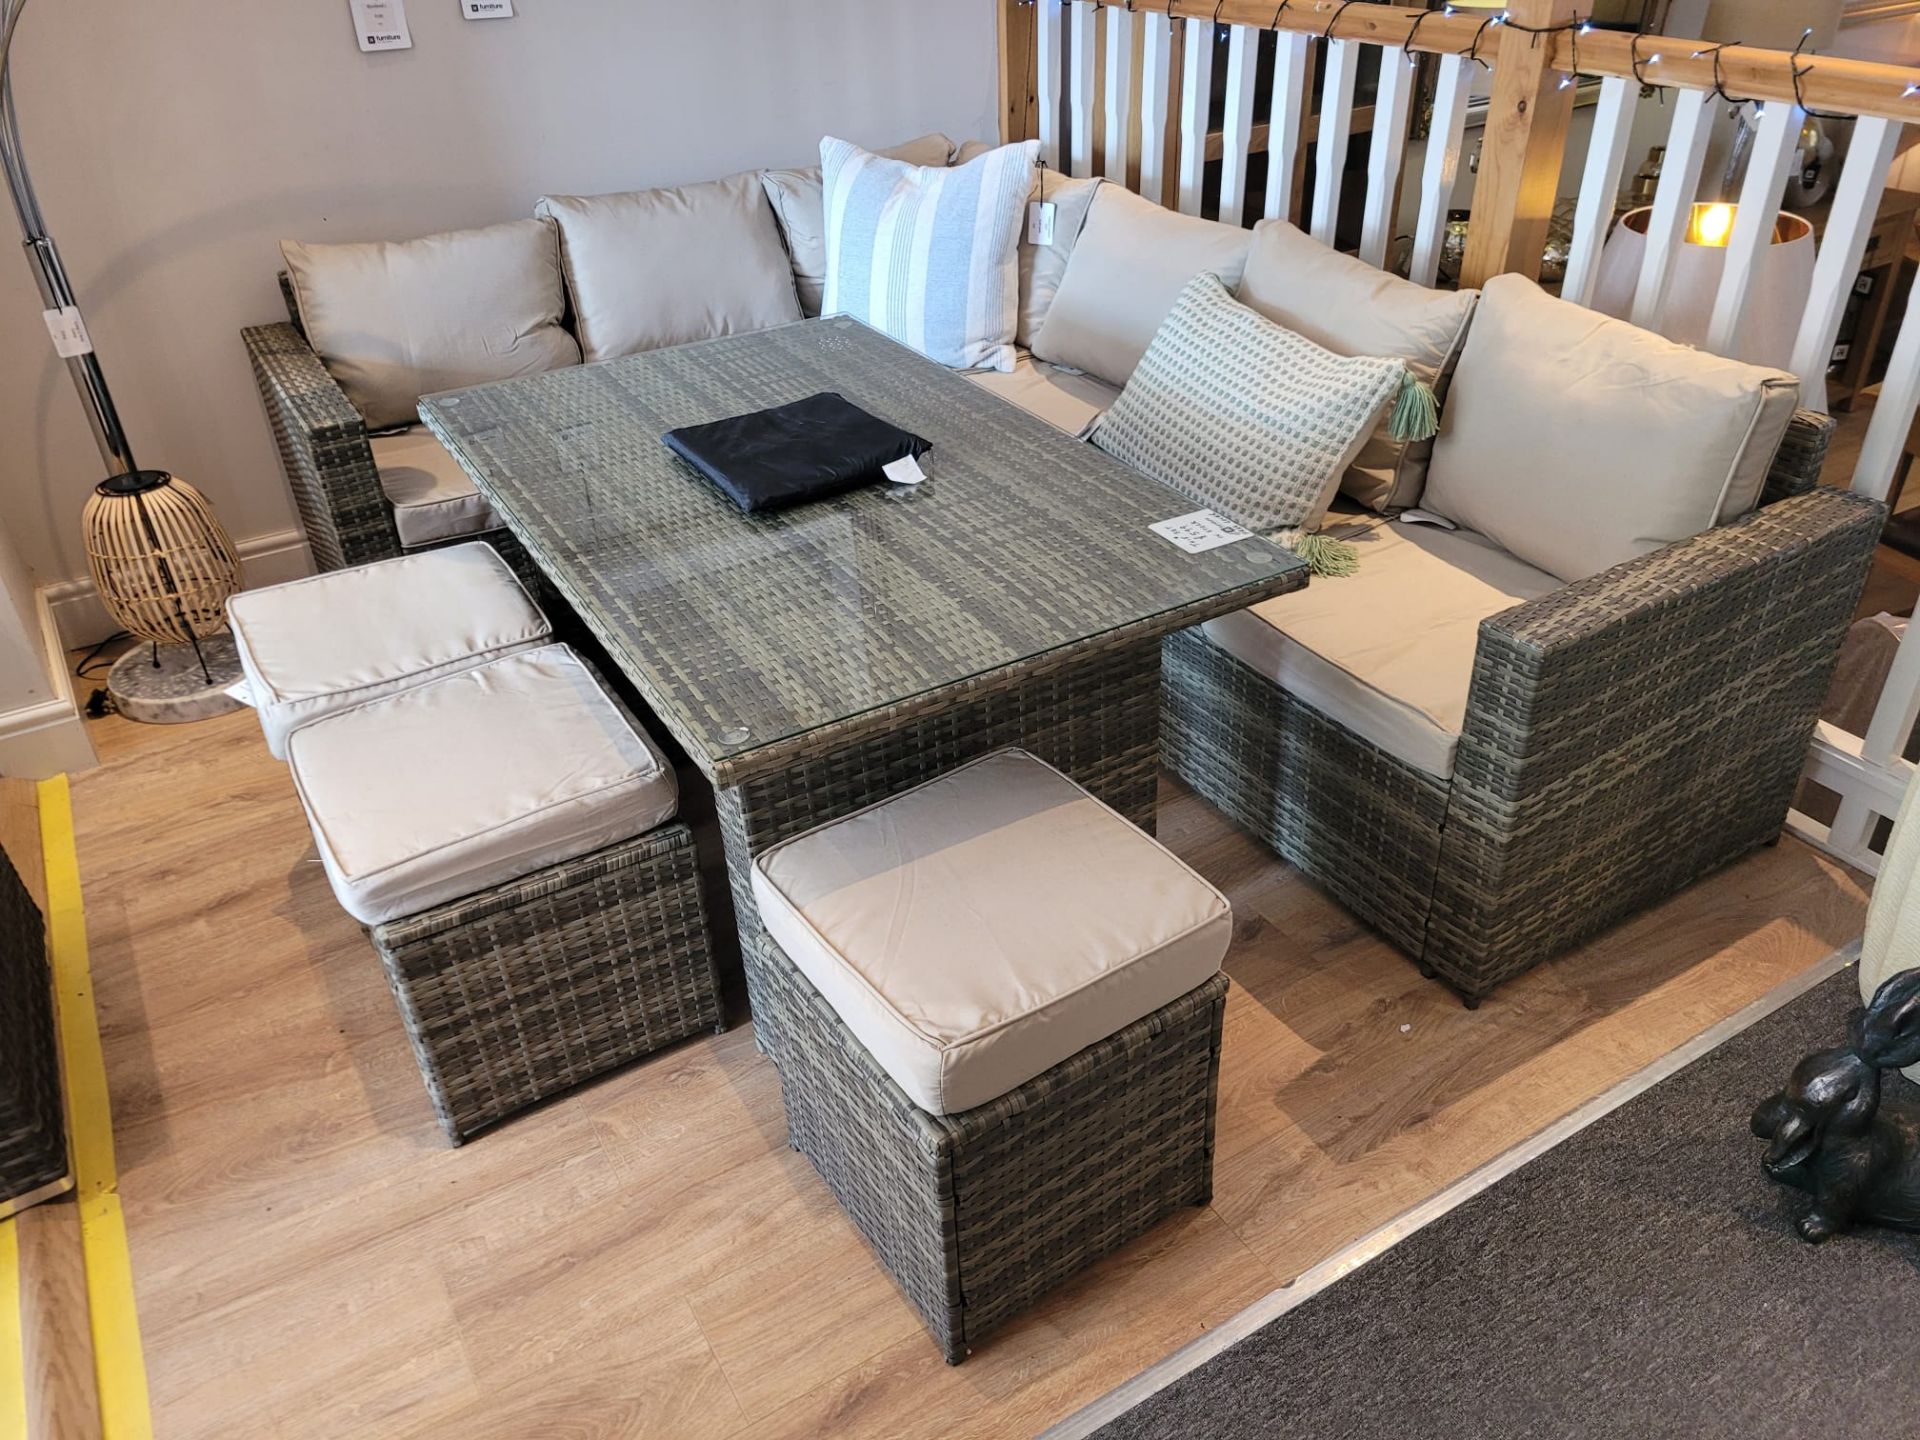 BRAND NEW BOXED - Rattan Garden Furniture Brown Natural Corner Sofa Dining Table Patio Set. - Image 2 of 11